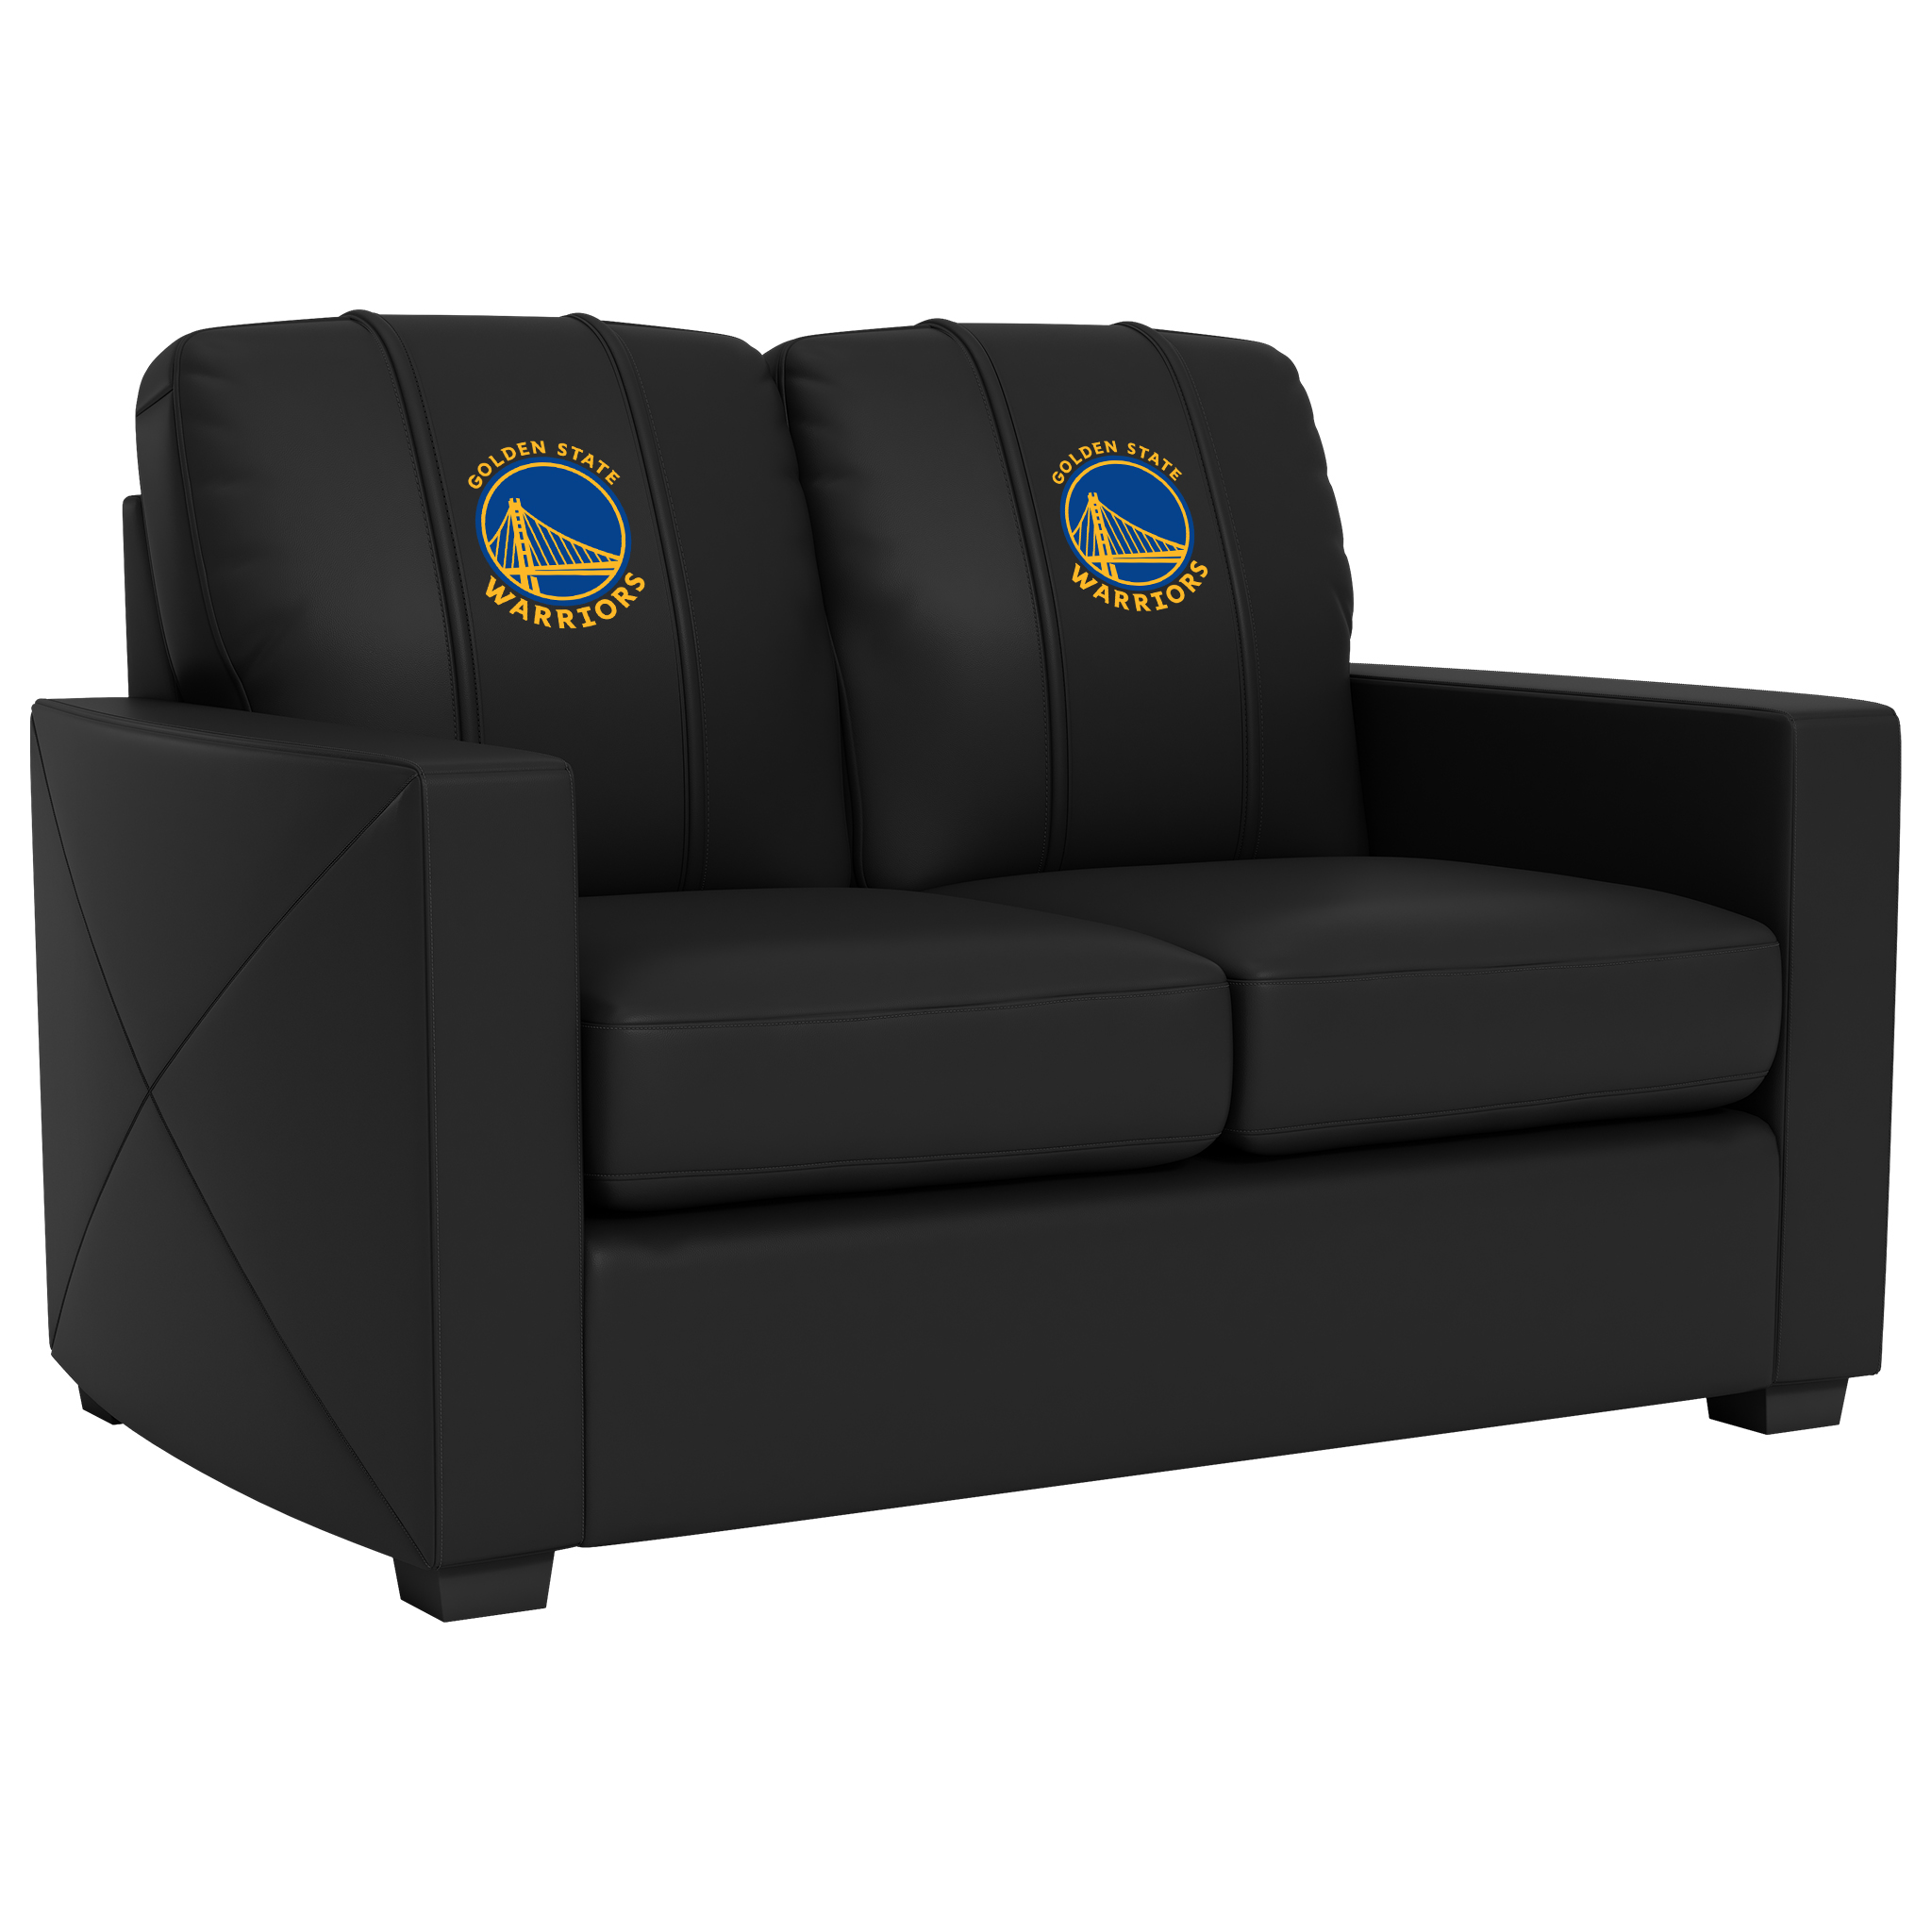 Golden State Warriors  Silver Loveseat with Golden State Warriors Global Logo